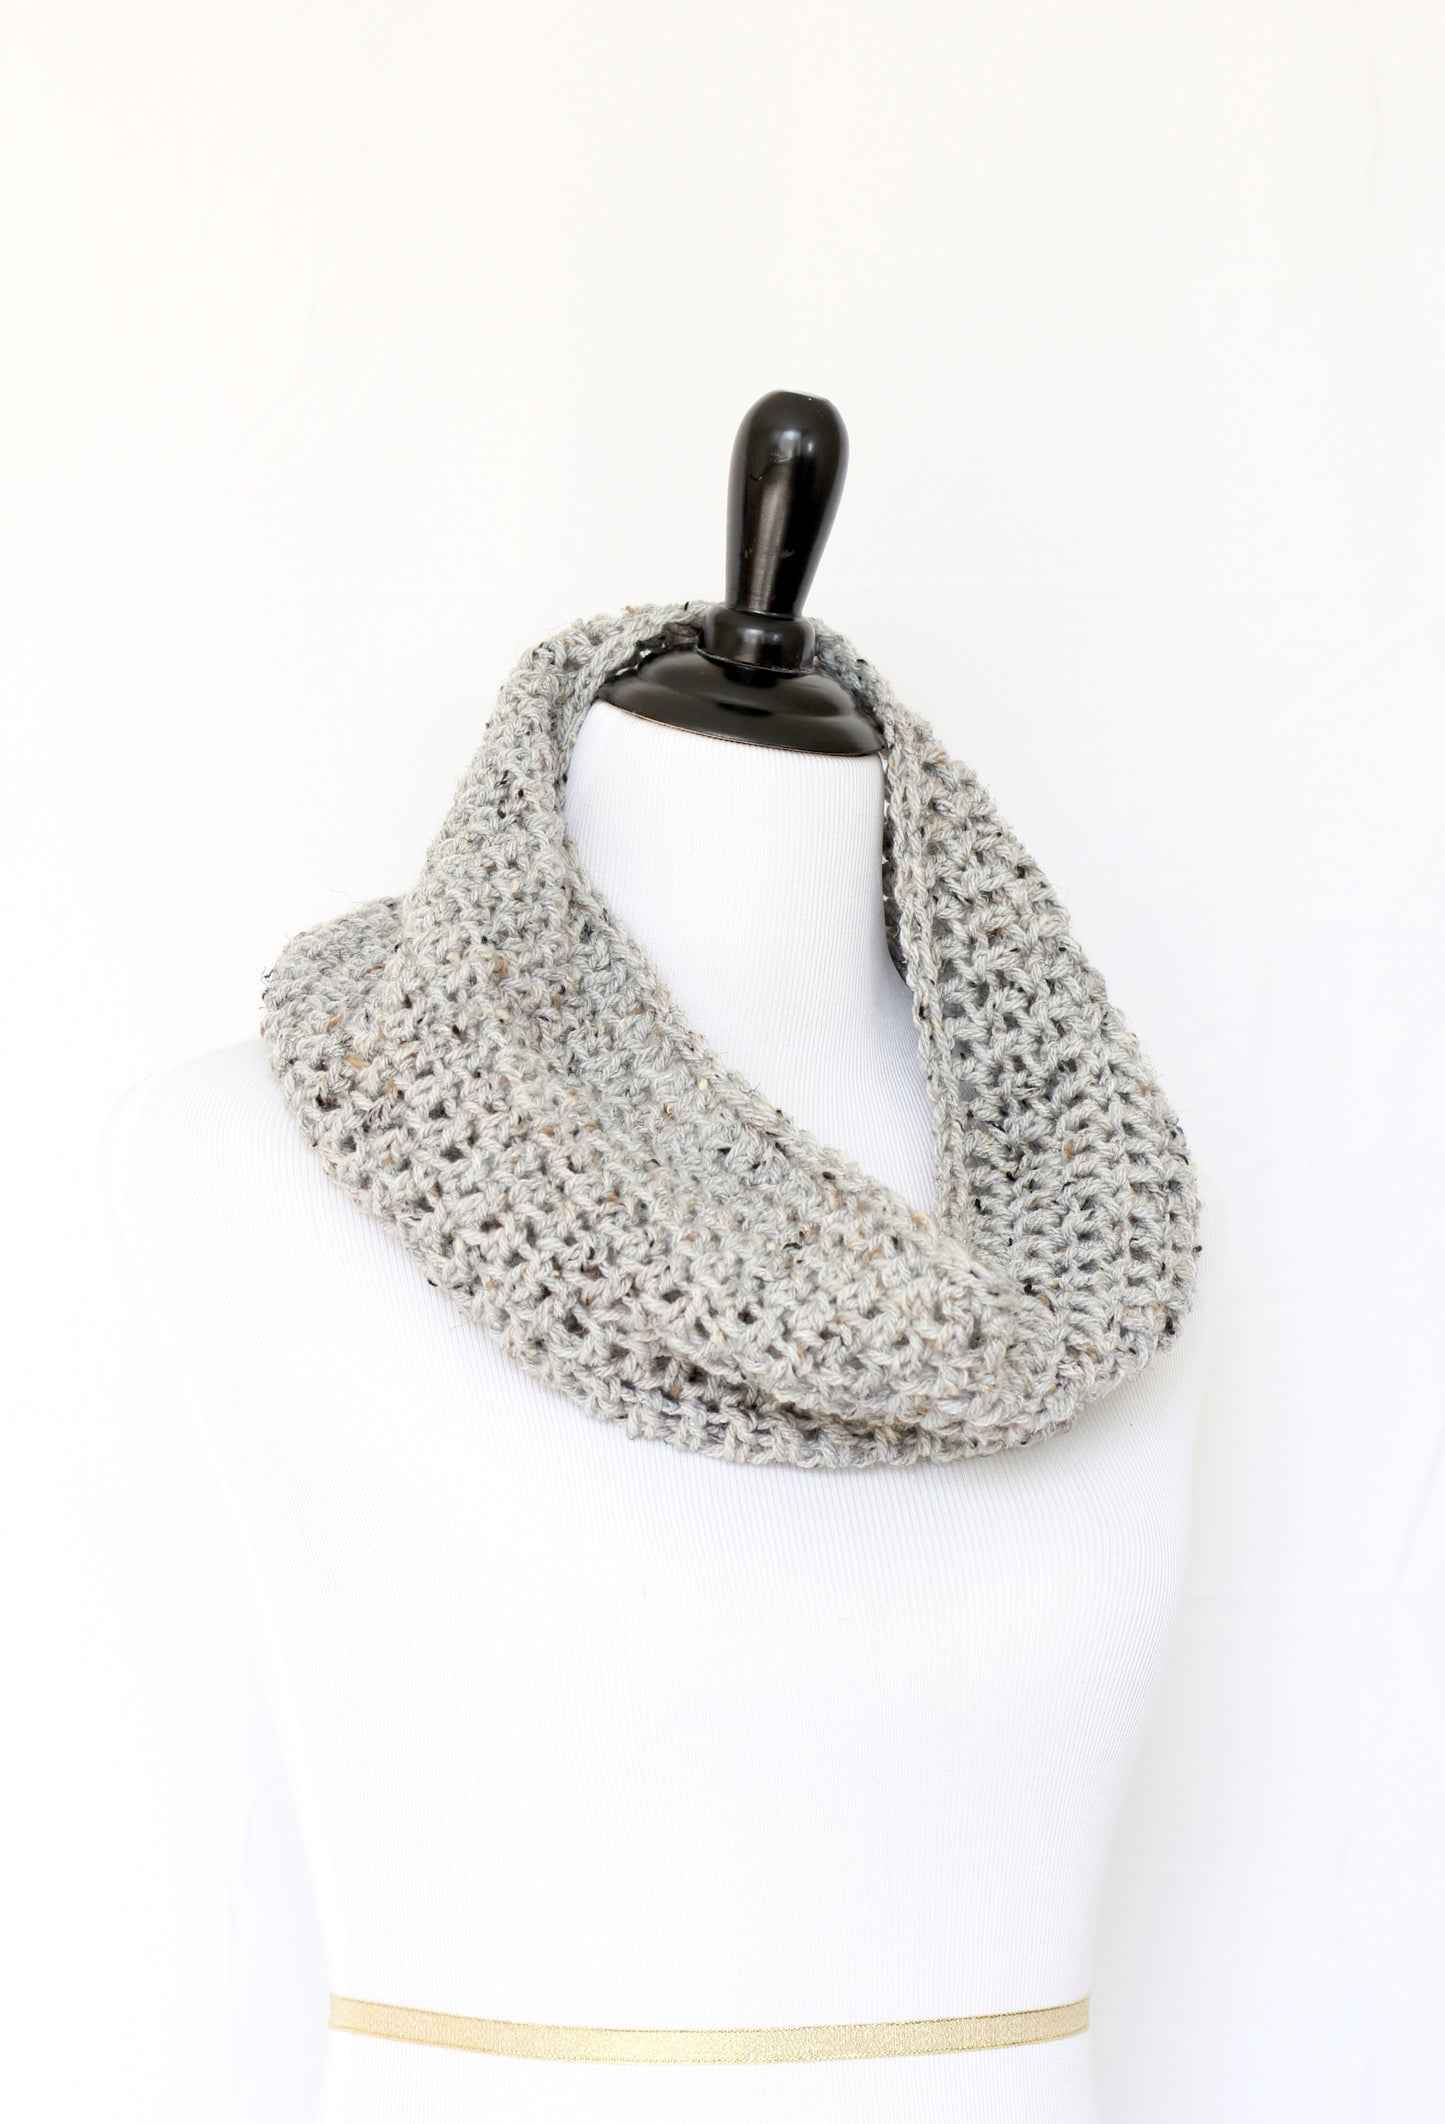 Crochet infinity scarf in grey color, chunky cowl